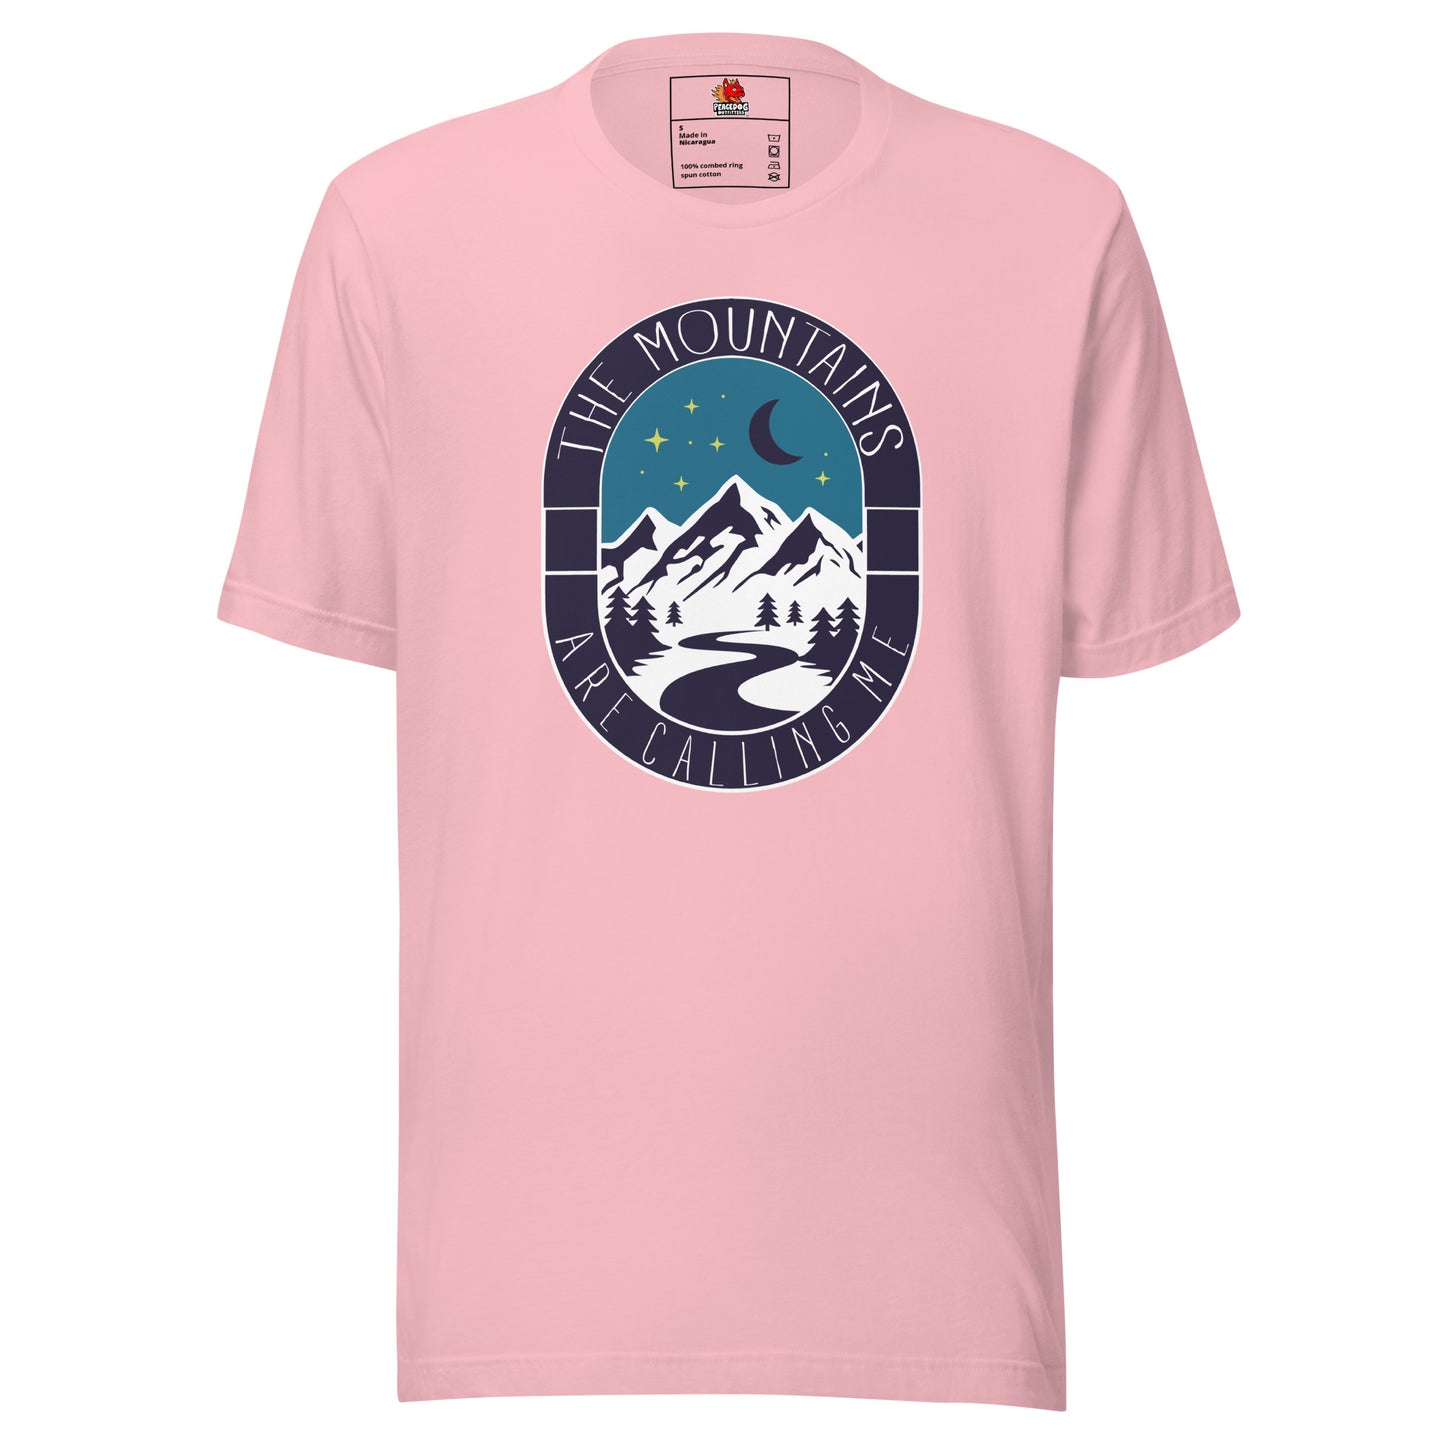 The Mountains are Calling Me T-Shirt